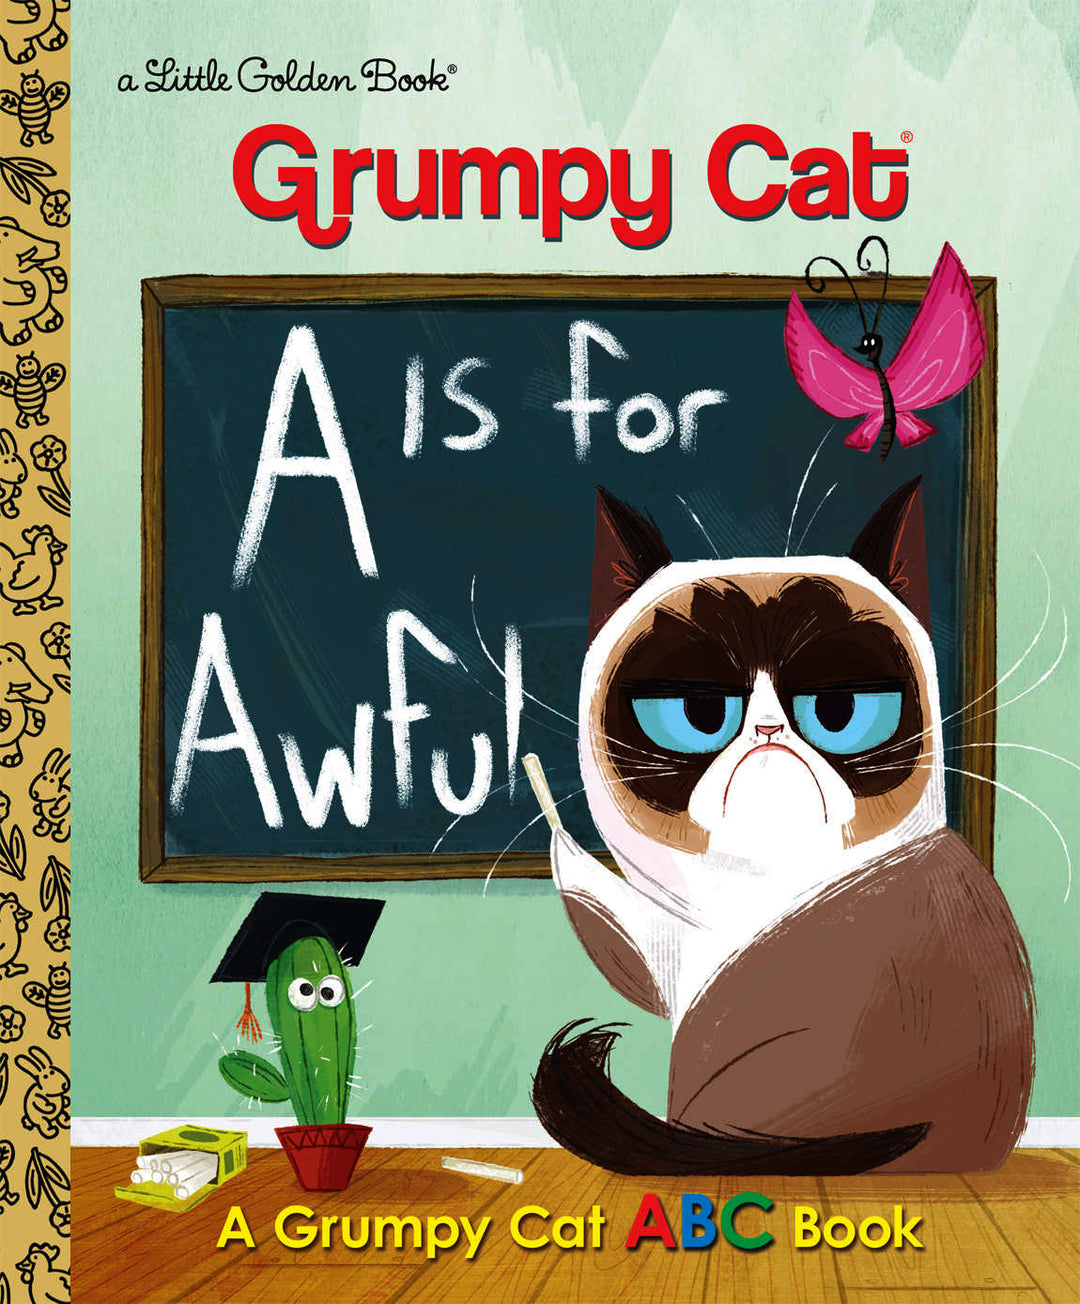 Grumpy Cat: A is for Awful Little Golden Book - Signed by the Artist